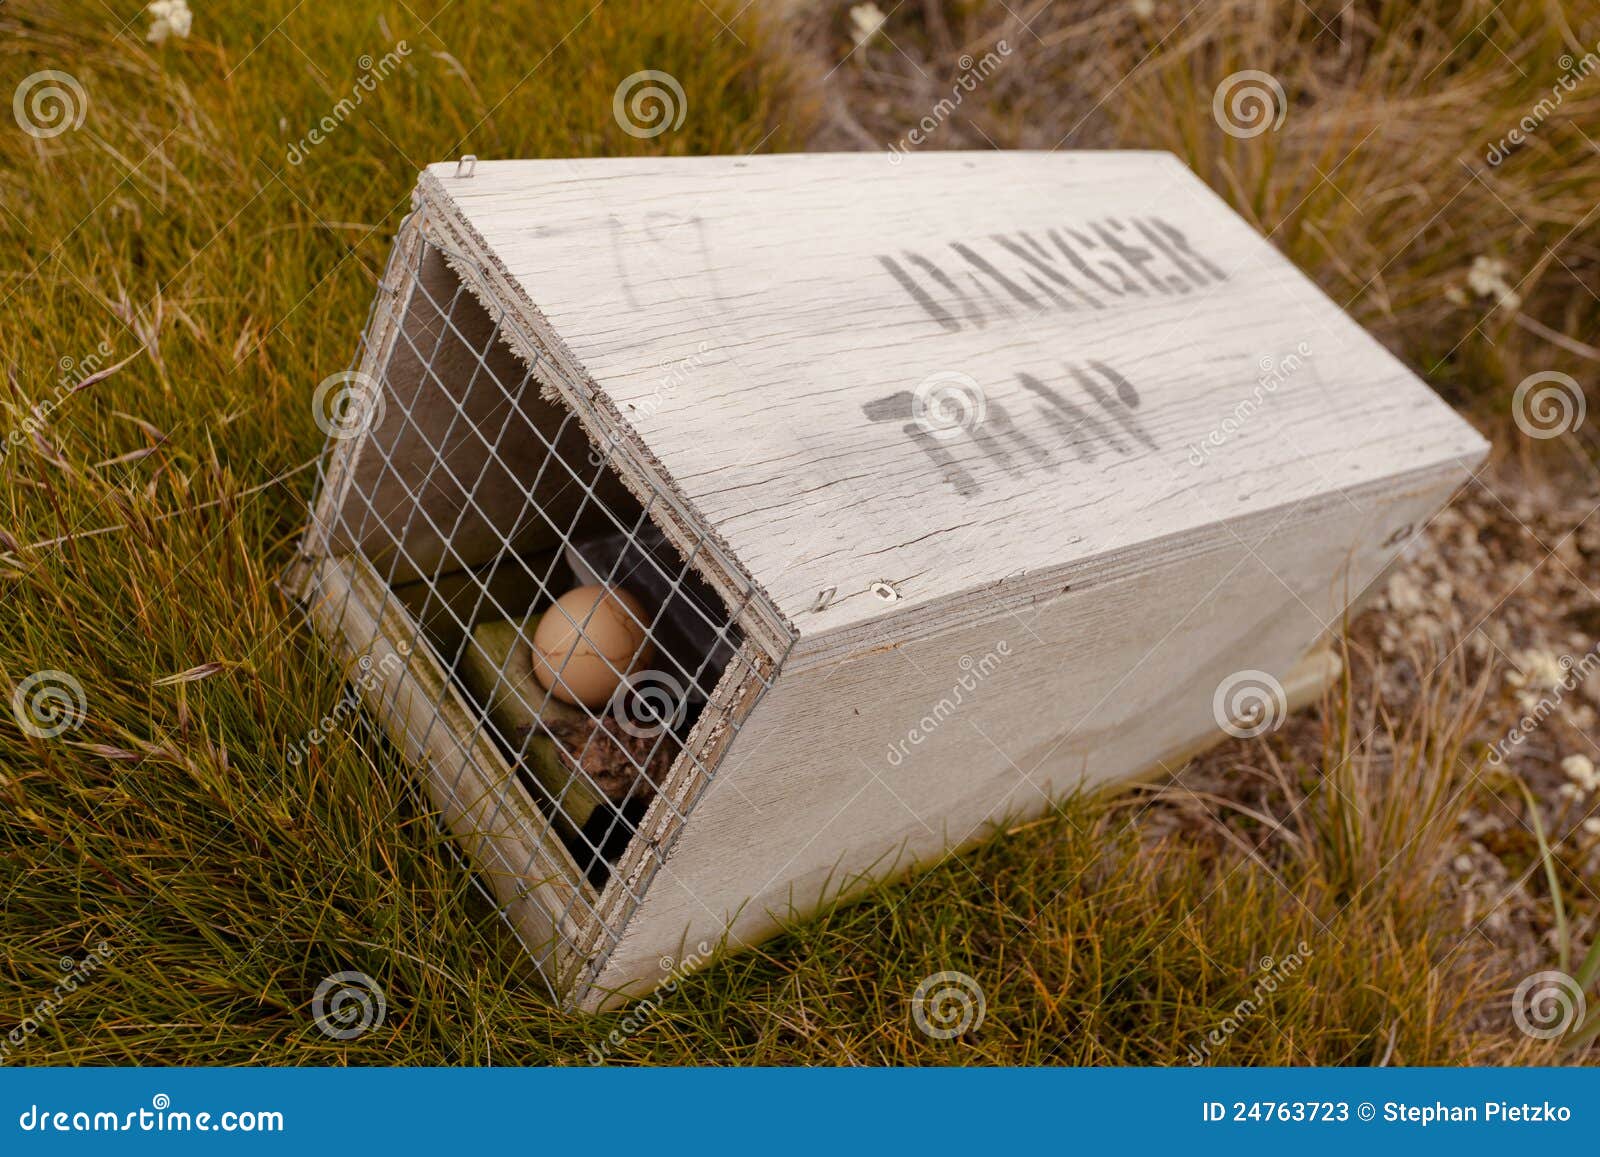 small animal trap with written warning for humans